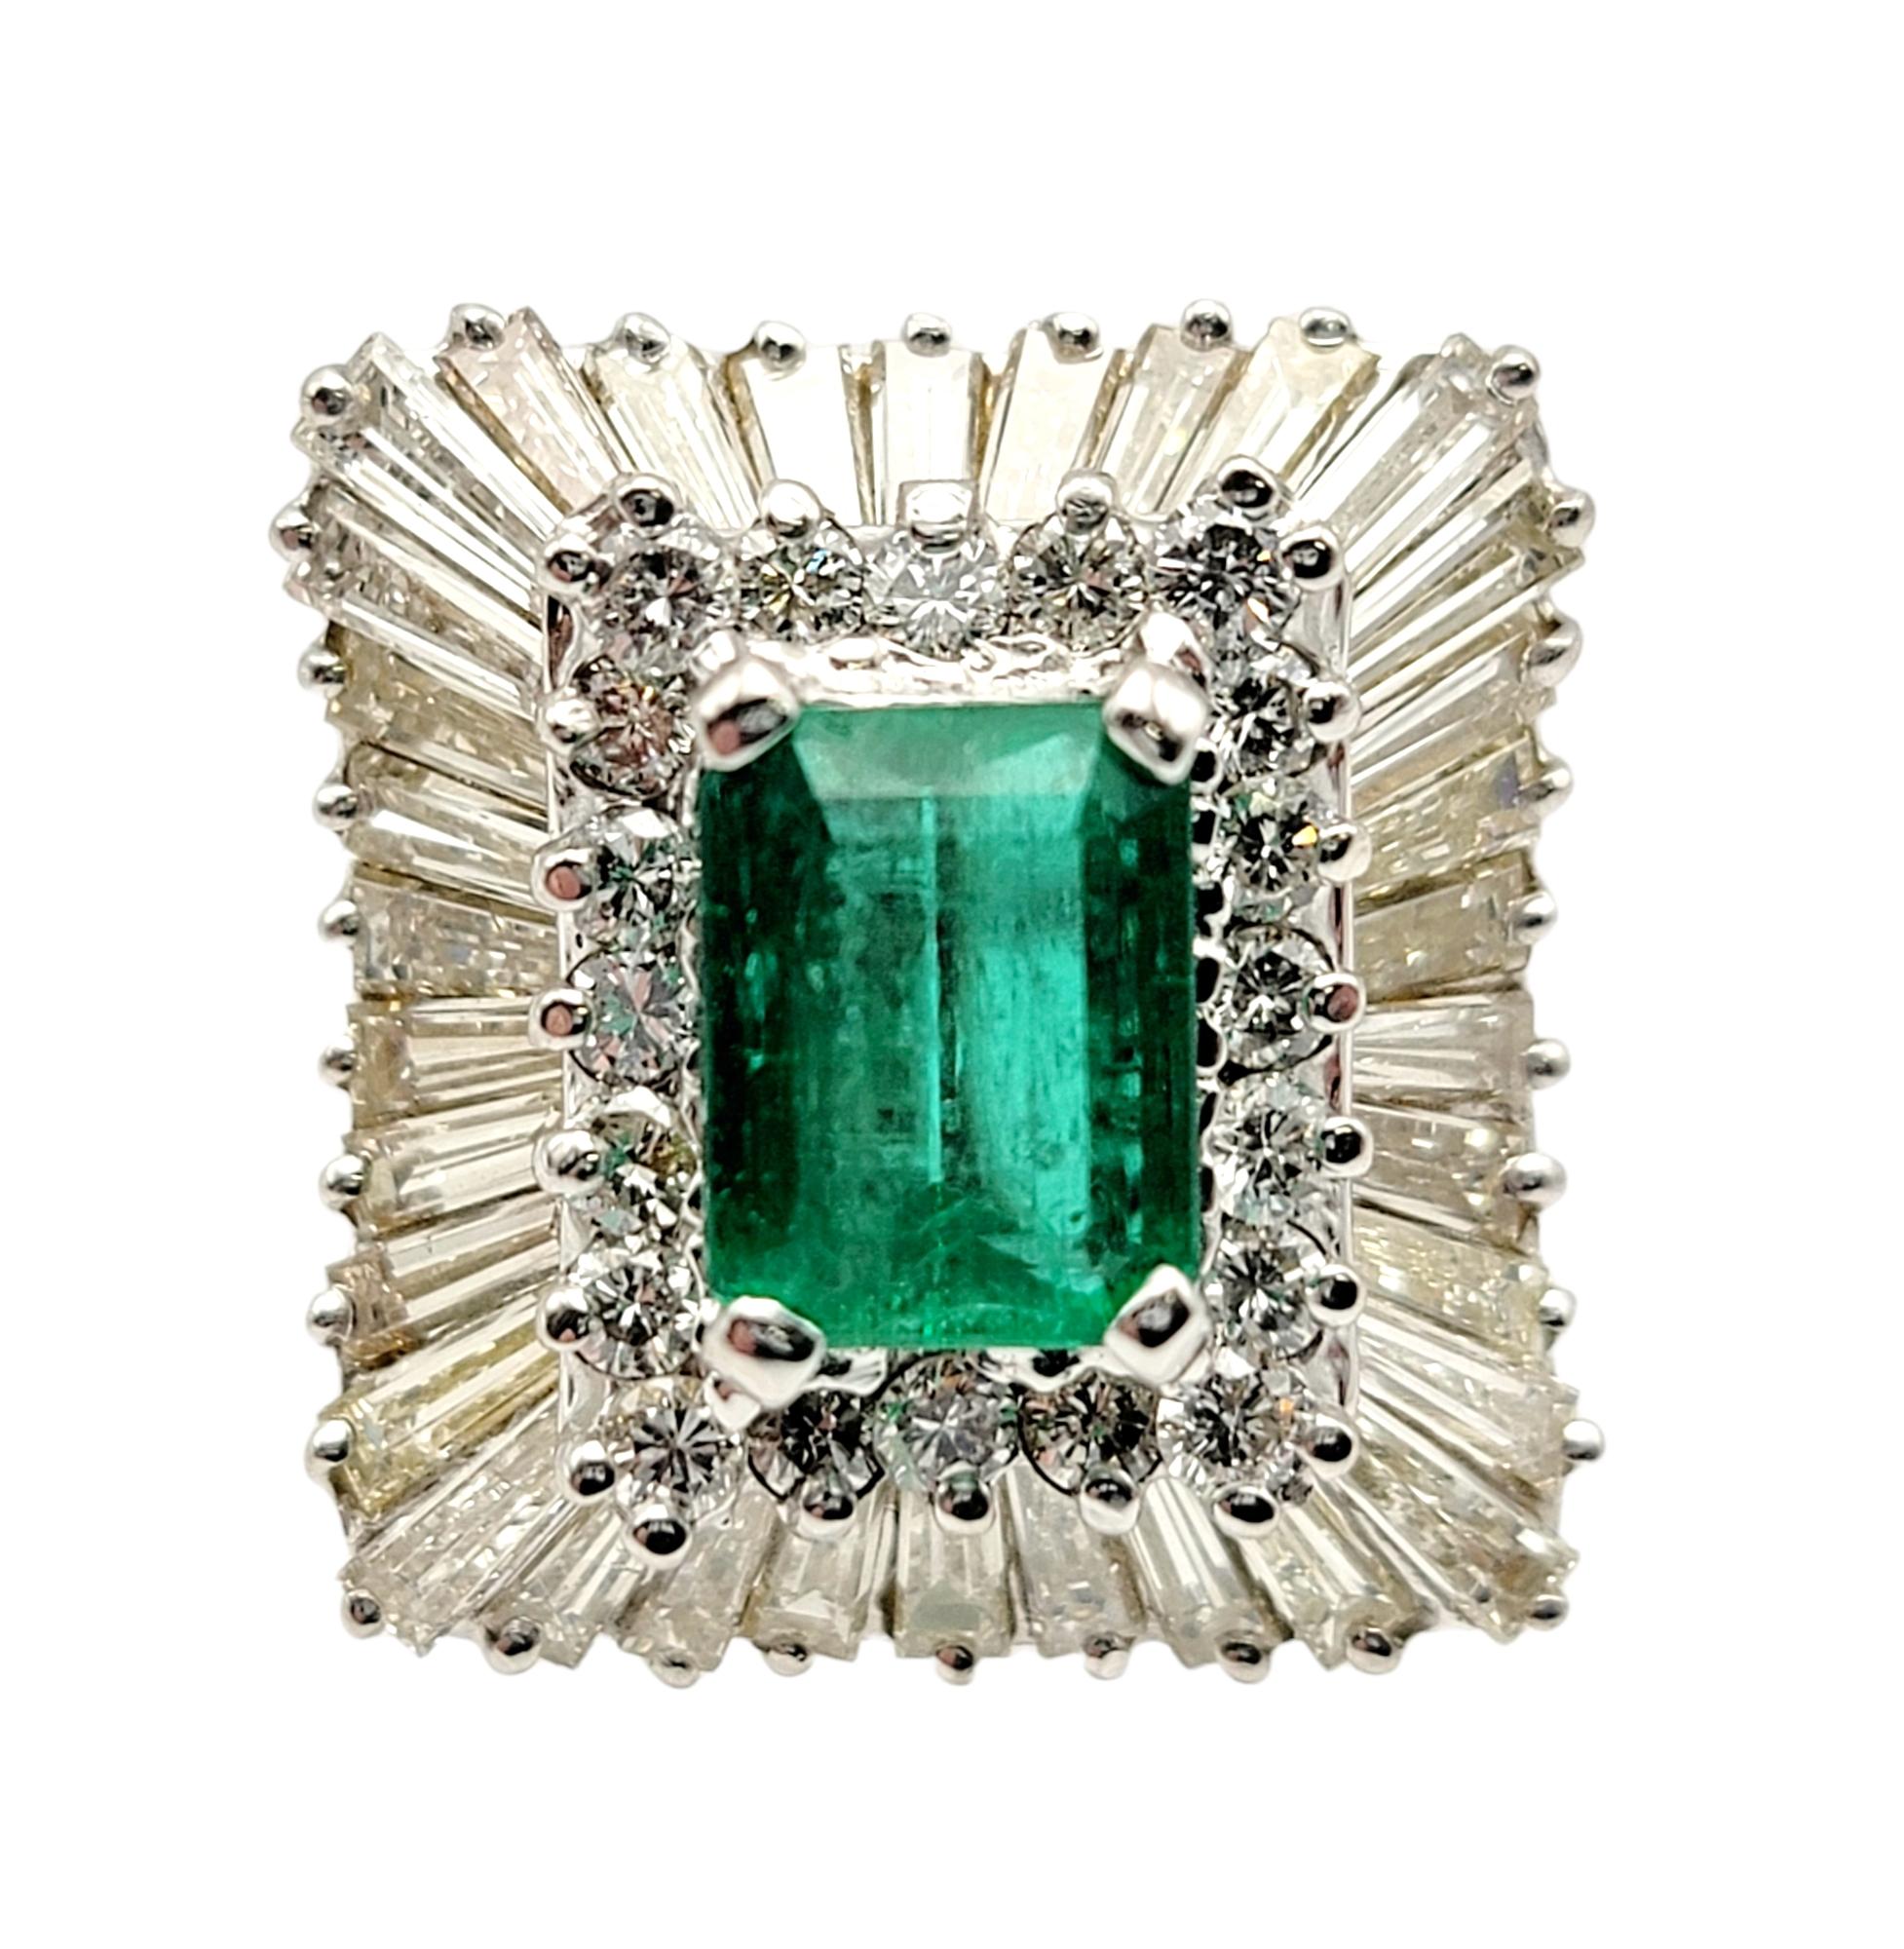 Ring size: 6

This stunning emerald and diamond cocktail ring is the absolute epitome of elegance. It features a single emerald cut natural emerald in a stunning bright green color, four prong set at the center of the piece. A halo of icy white